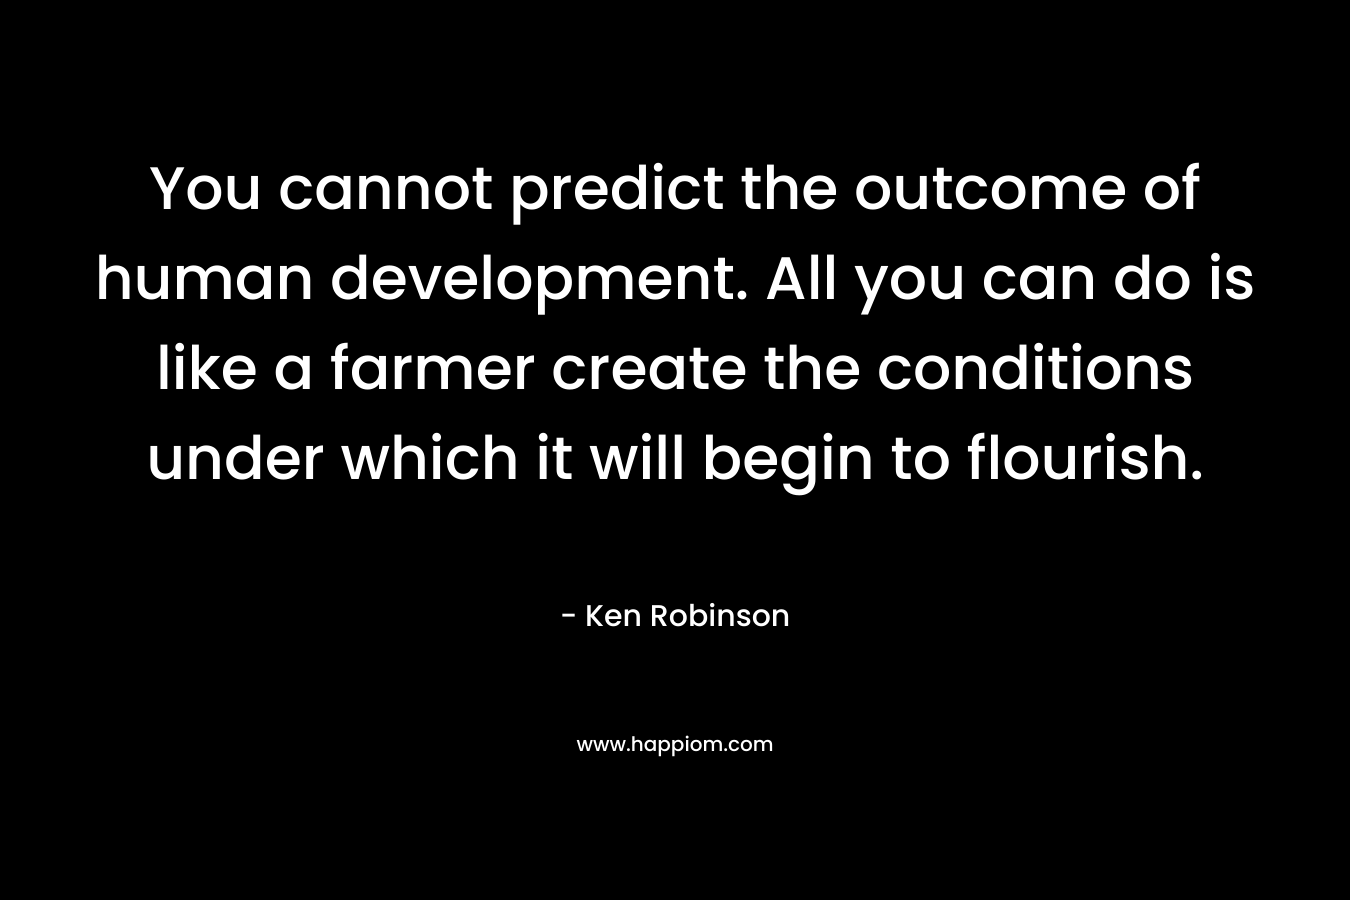 You cannot predict the outcome of human development. All you can do is like a farmer create the conditions under which it will begin to flourish. – Ken Robinson